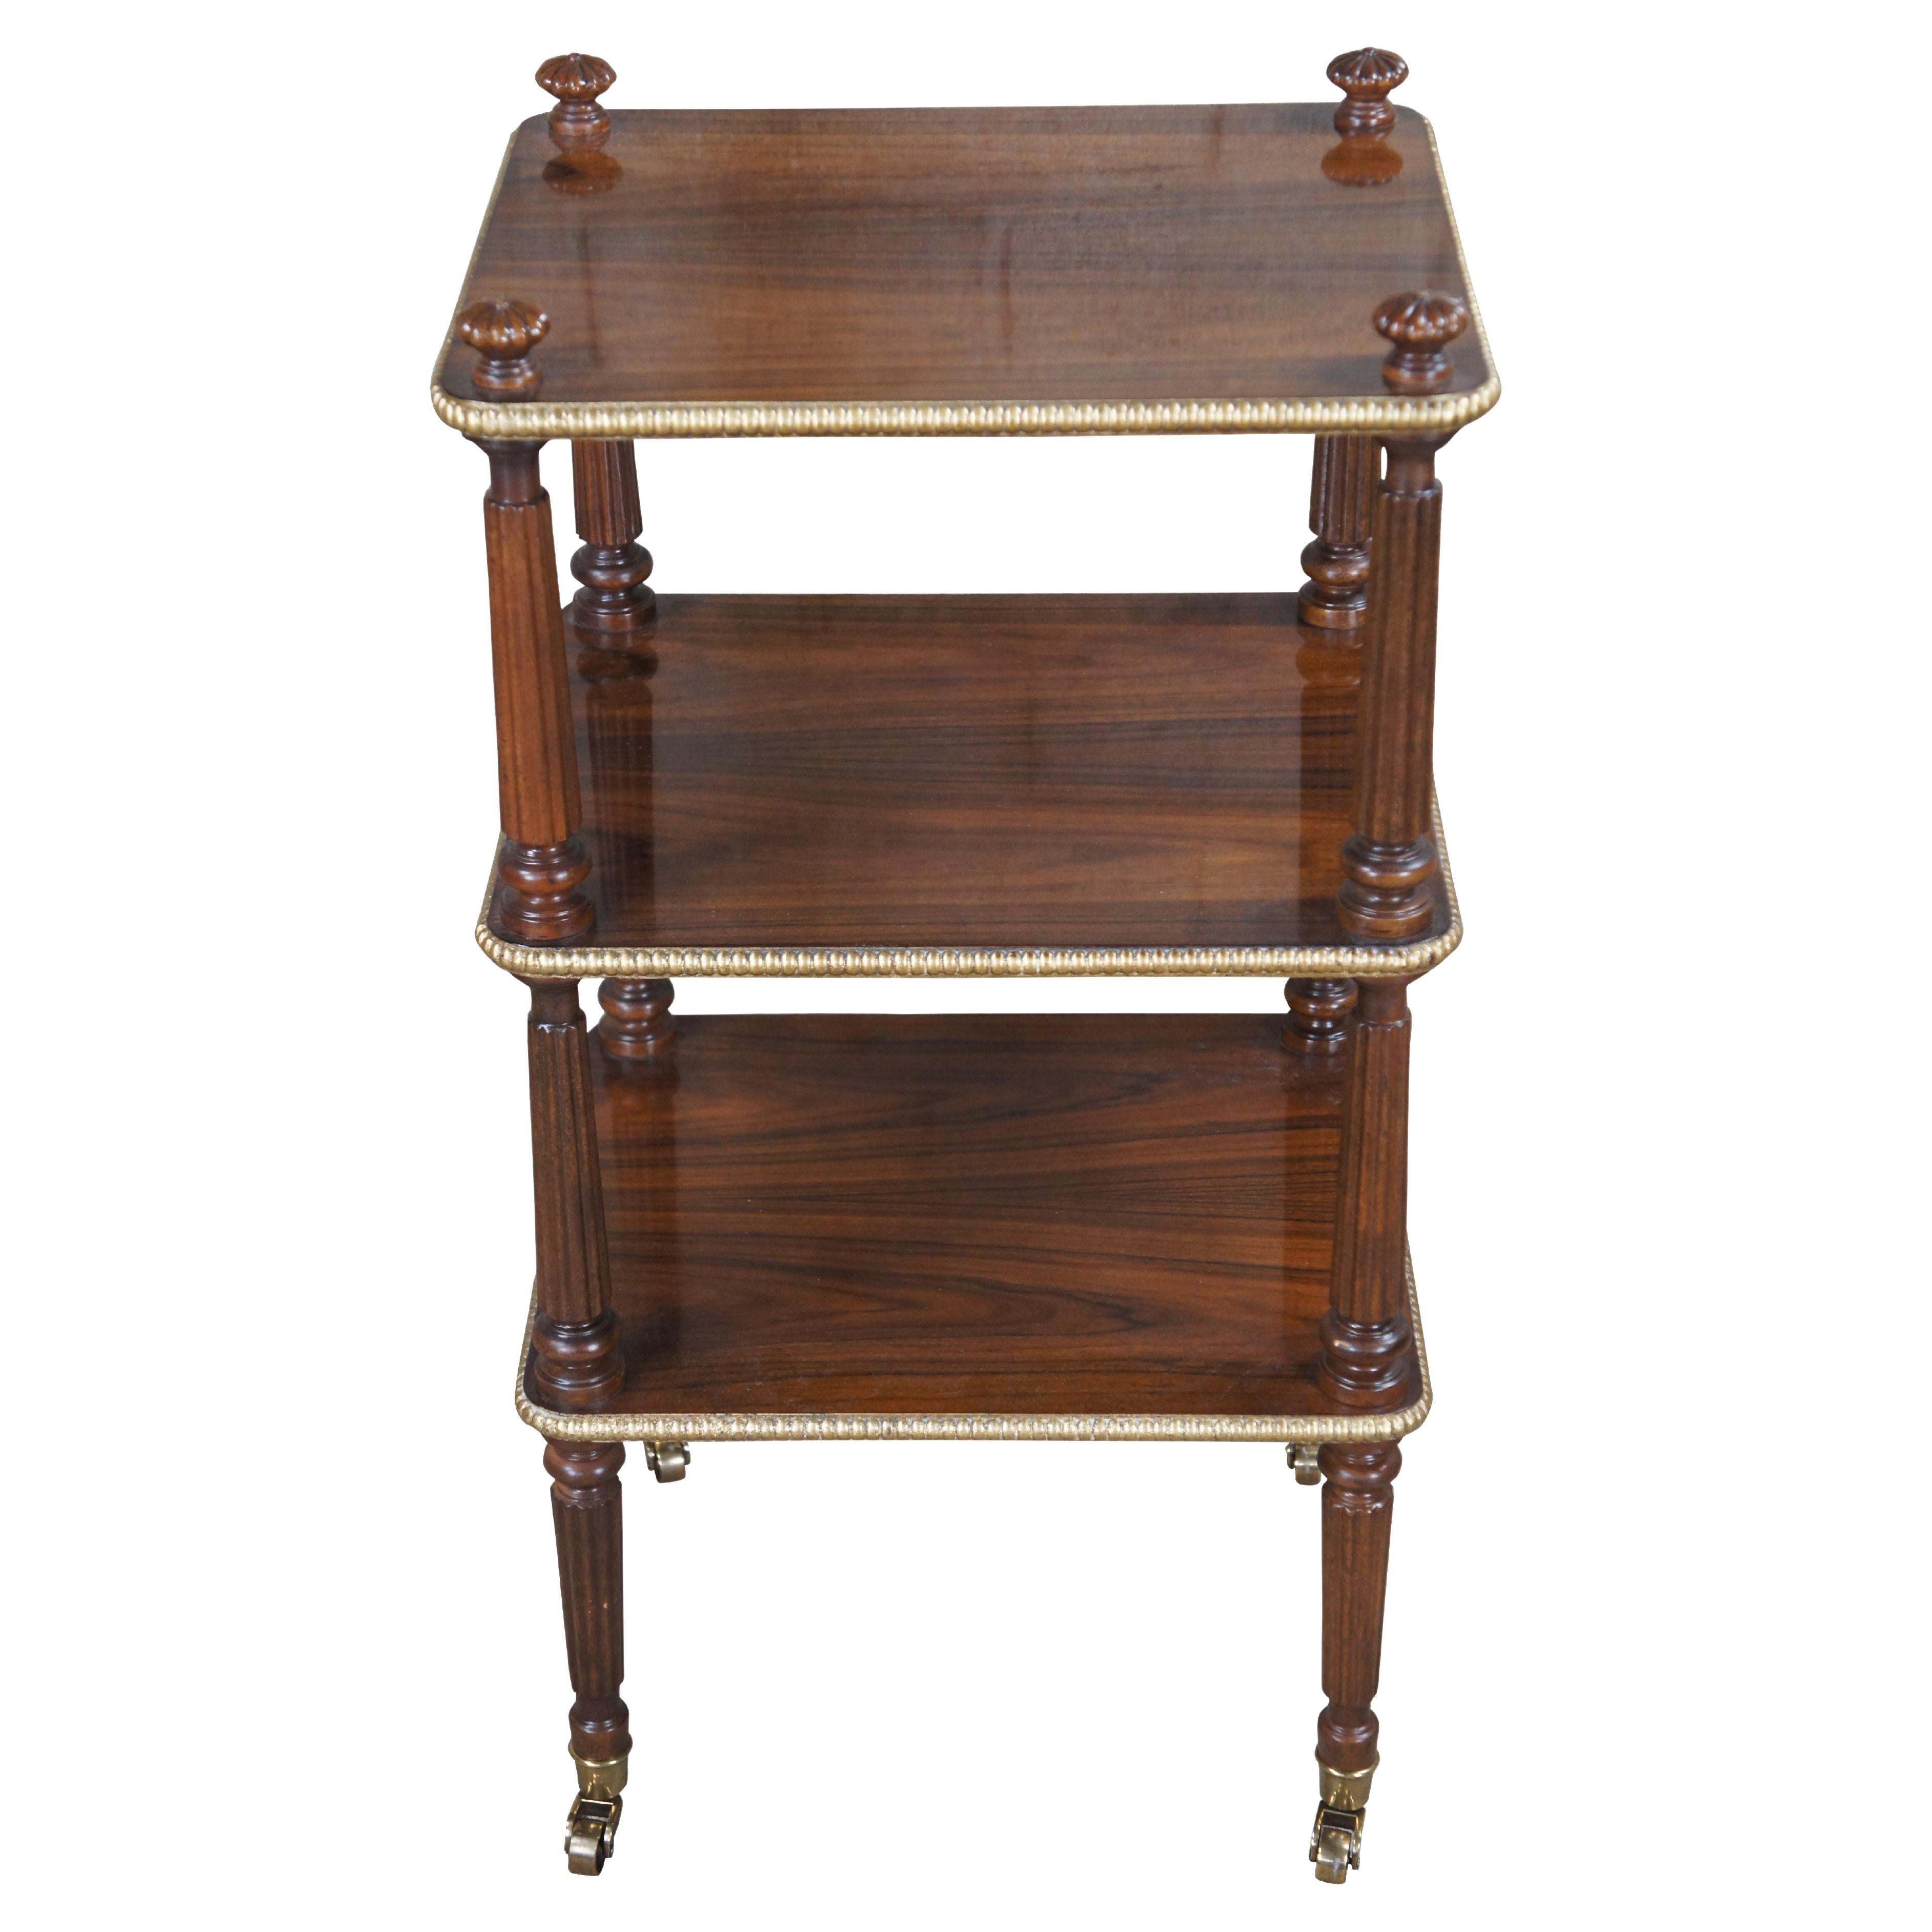 Baker Stately Homes Regency Rosewood Tiered Etagere Cart Side Table Stand 30" (table d'appoint à étages) en vente